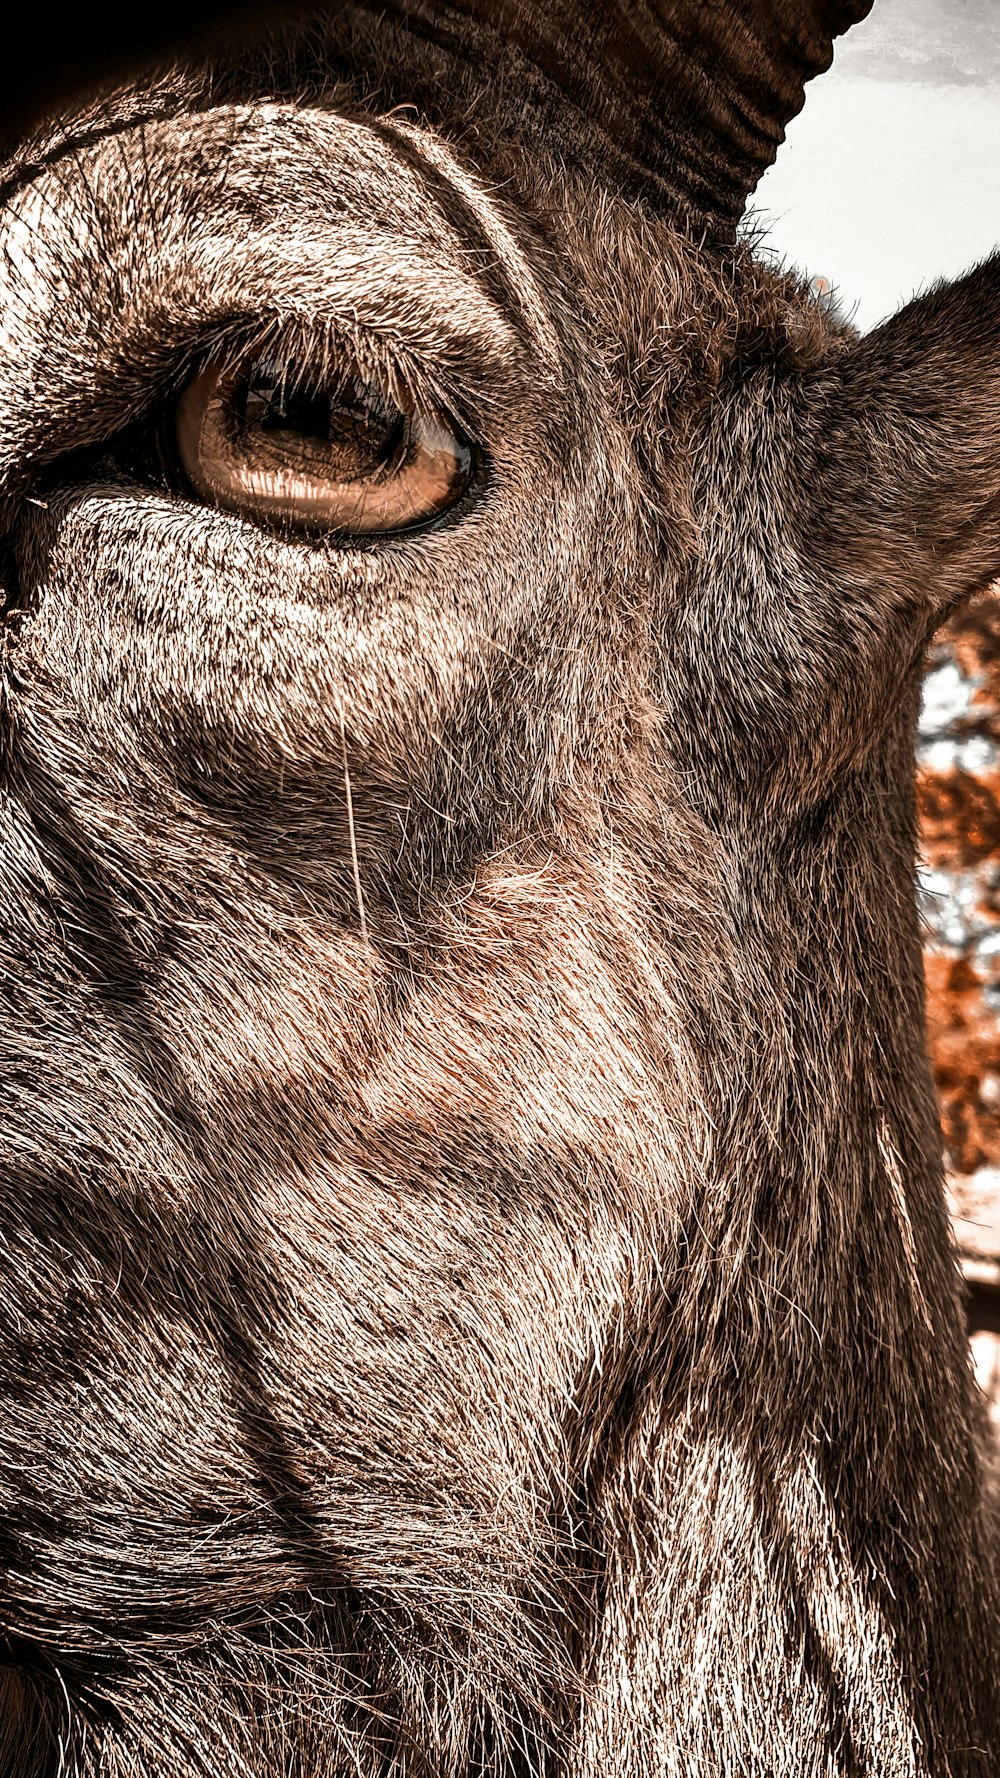 a close up of a goat's face with trees in the background